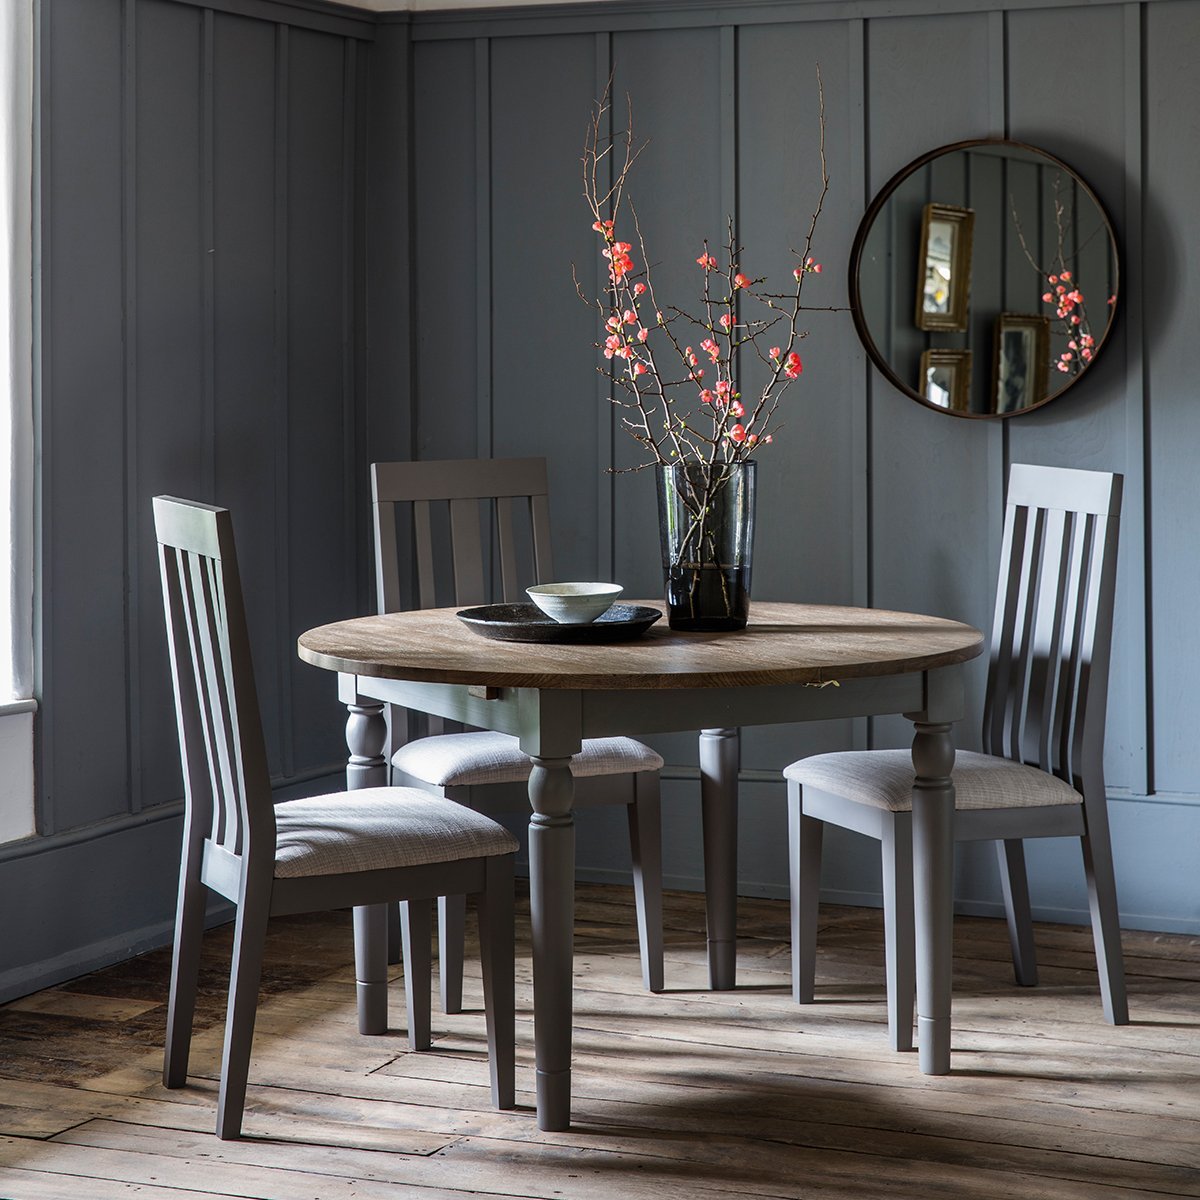 Gallery Interiors Cookham 4 6 Seater Round Extendable Dining Table